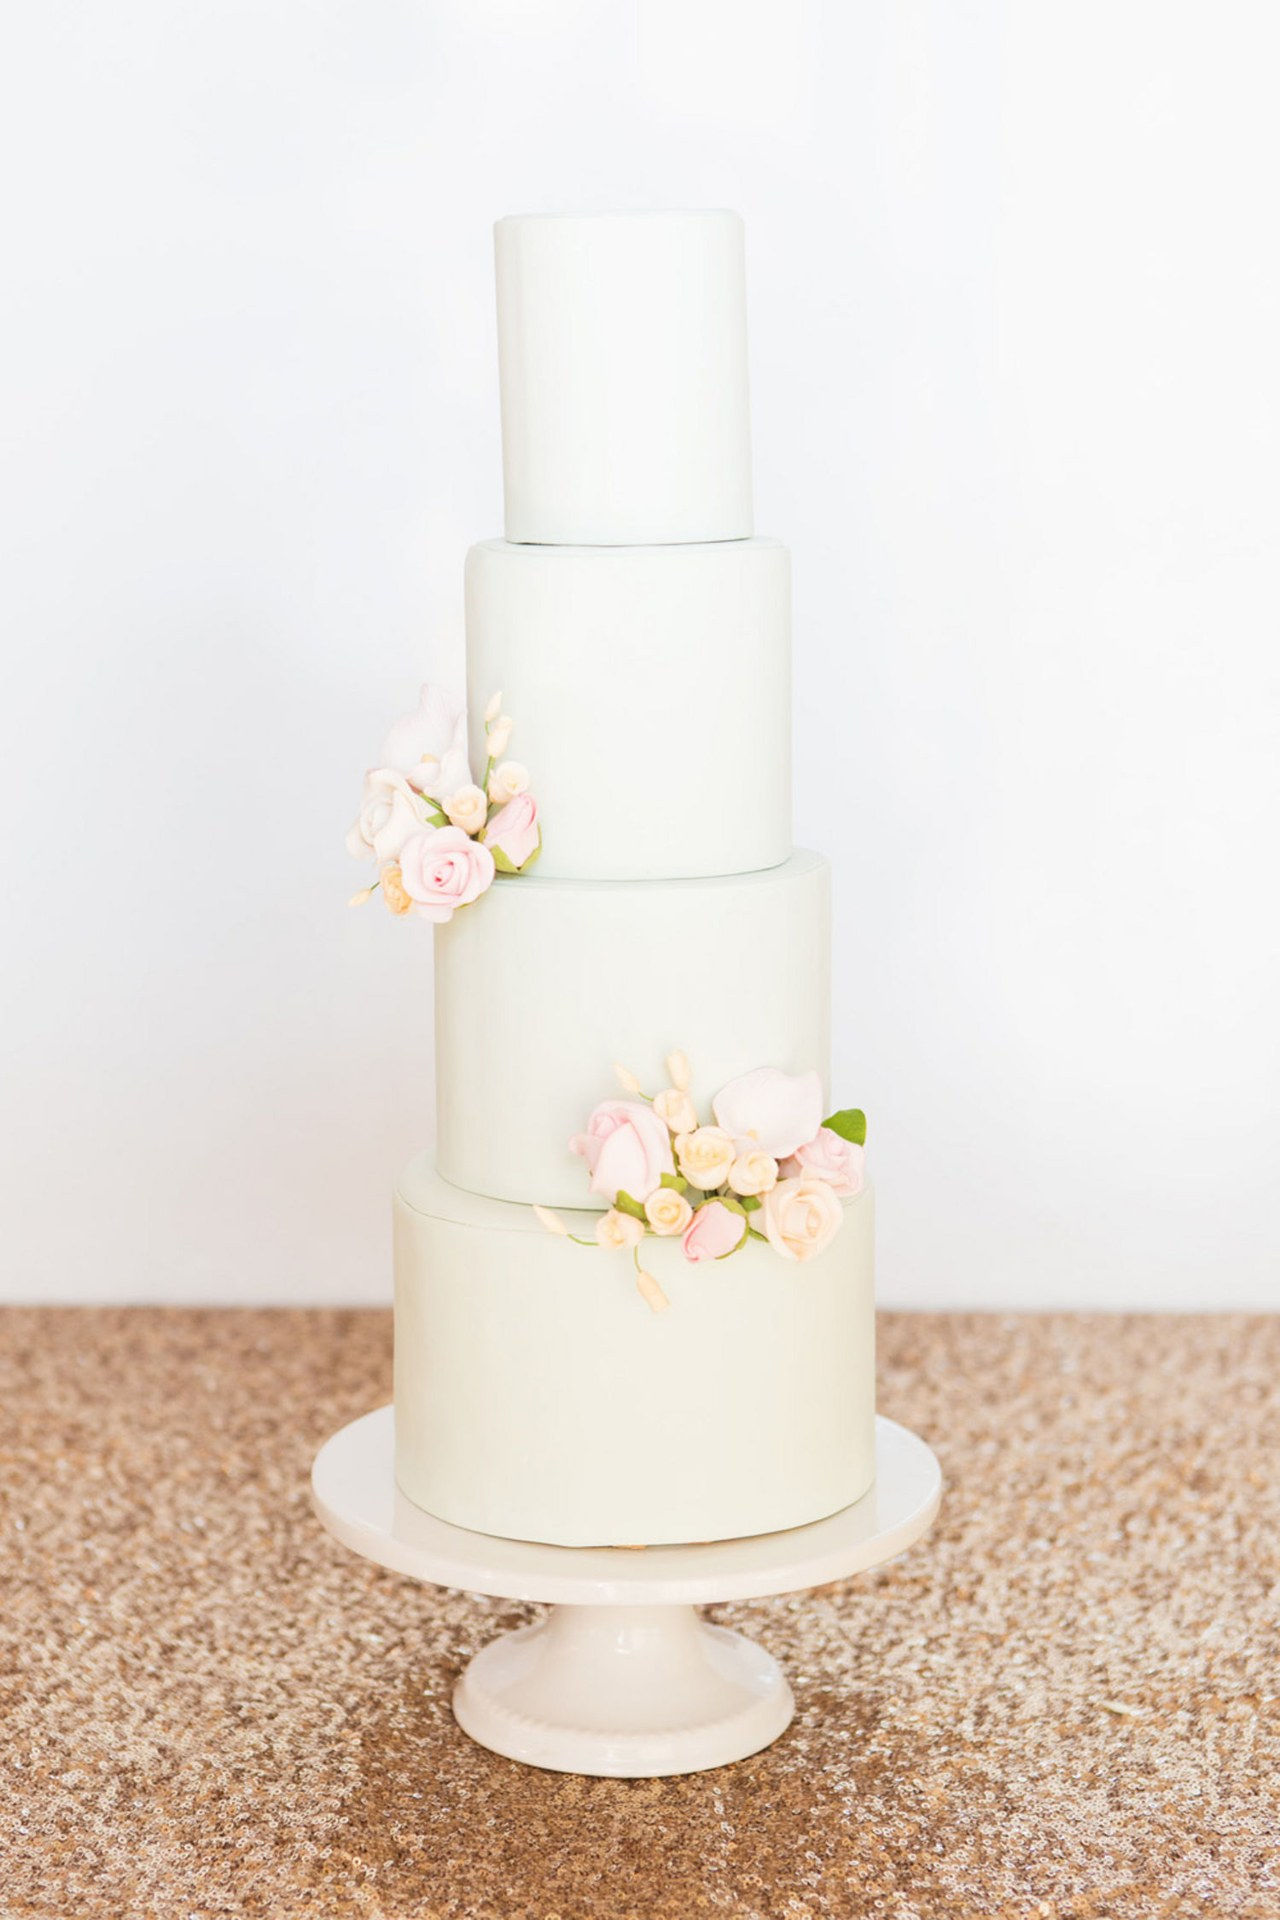 1 best nyc wedding cakes made in heaven cakes 0930